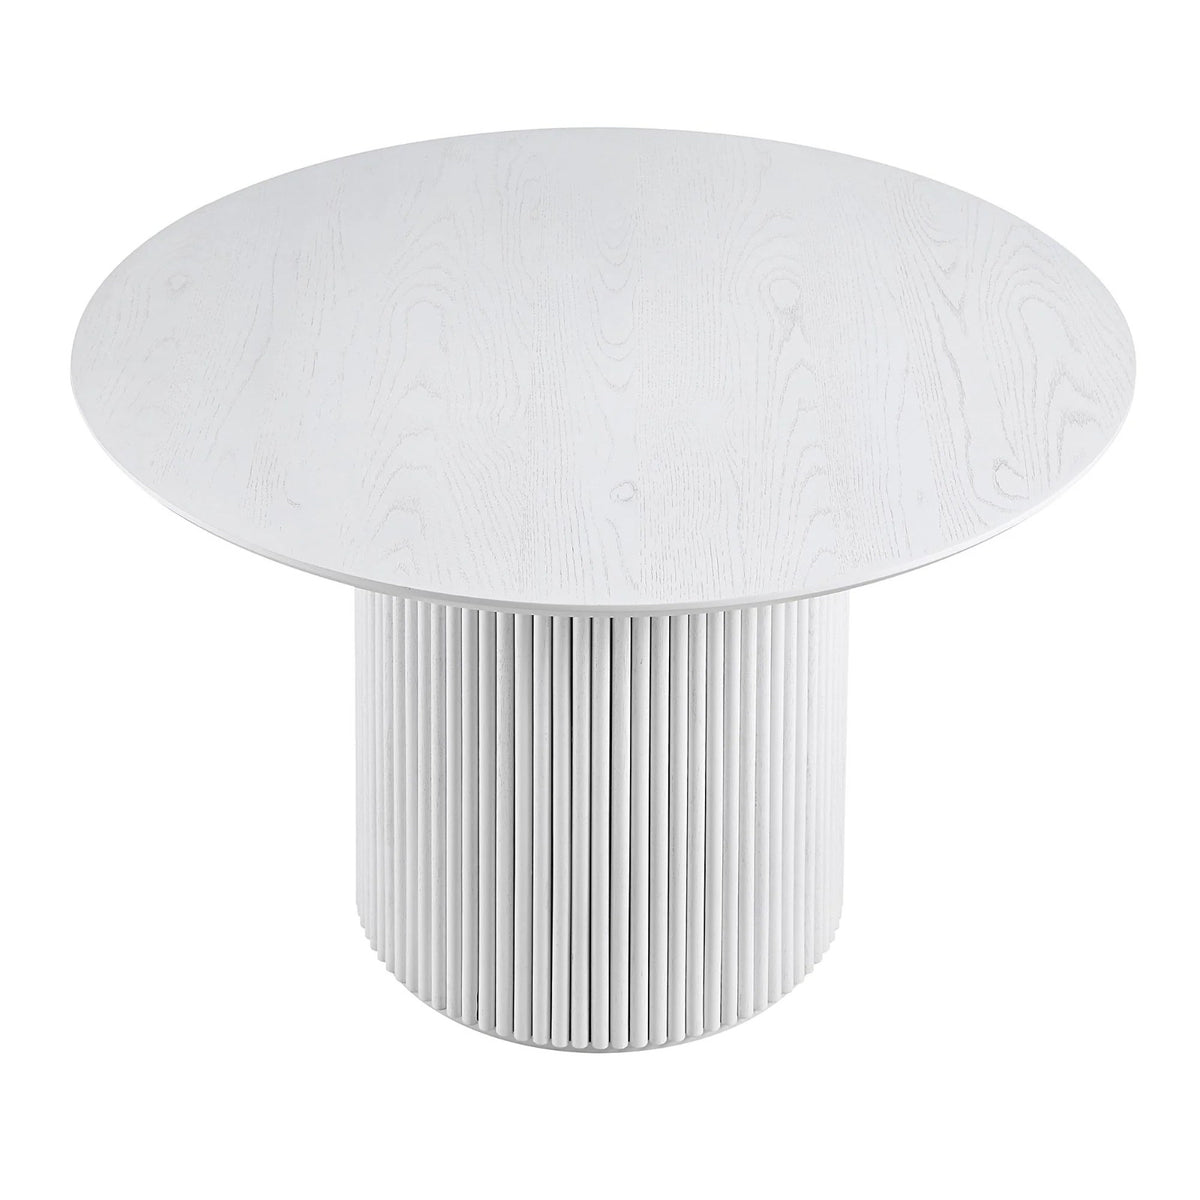 HAND CRAFTED BAKU ROUND WHITE WOOD PEDESTAL DINING TABLE